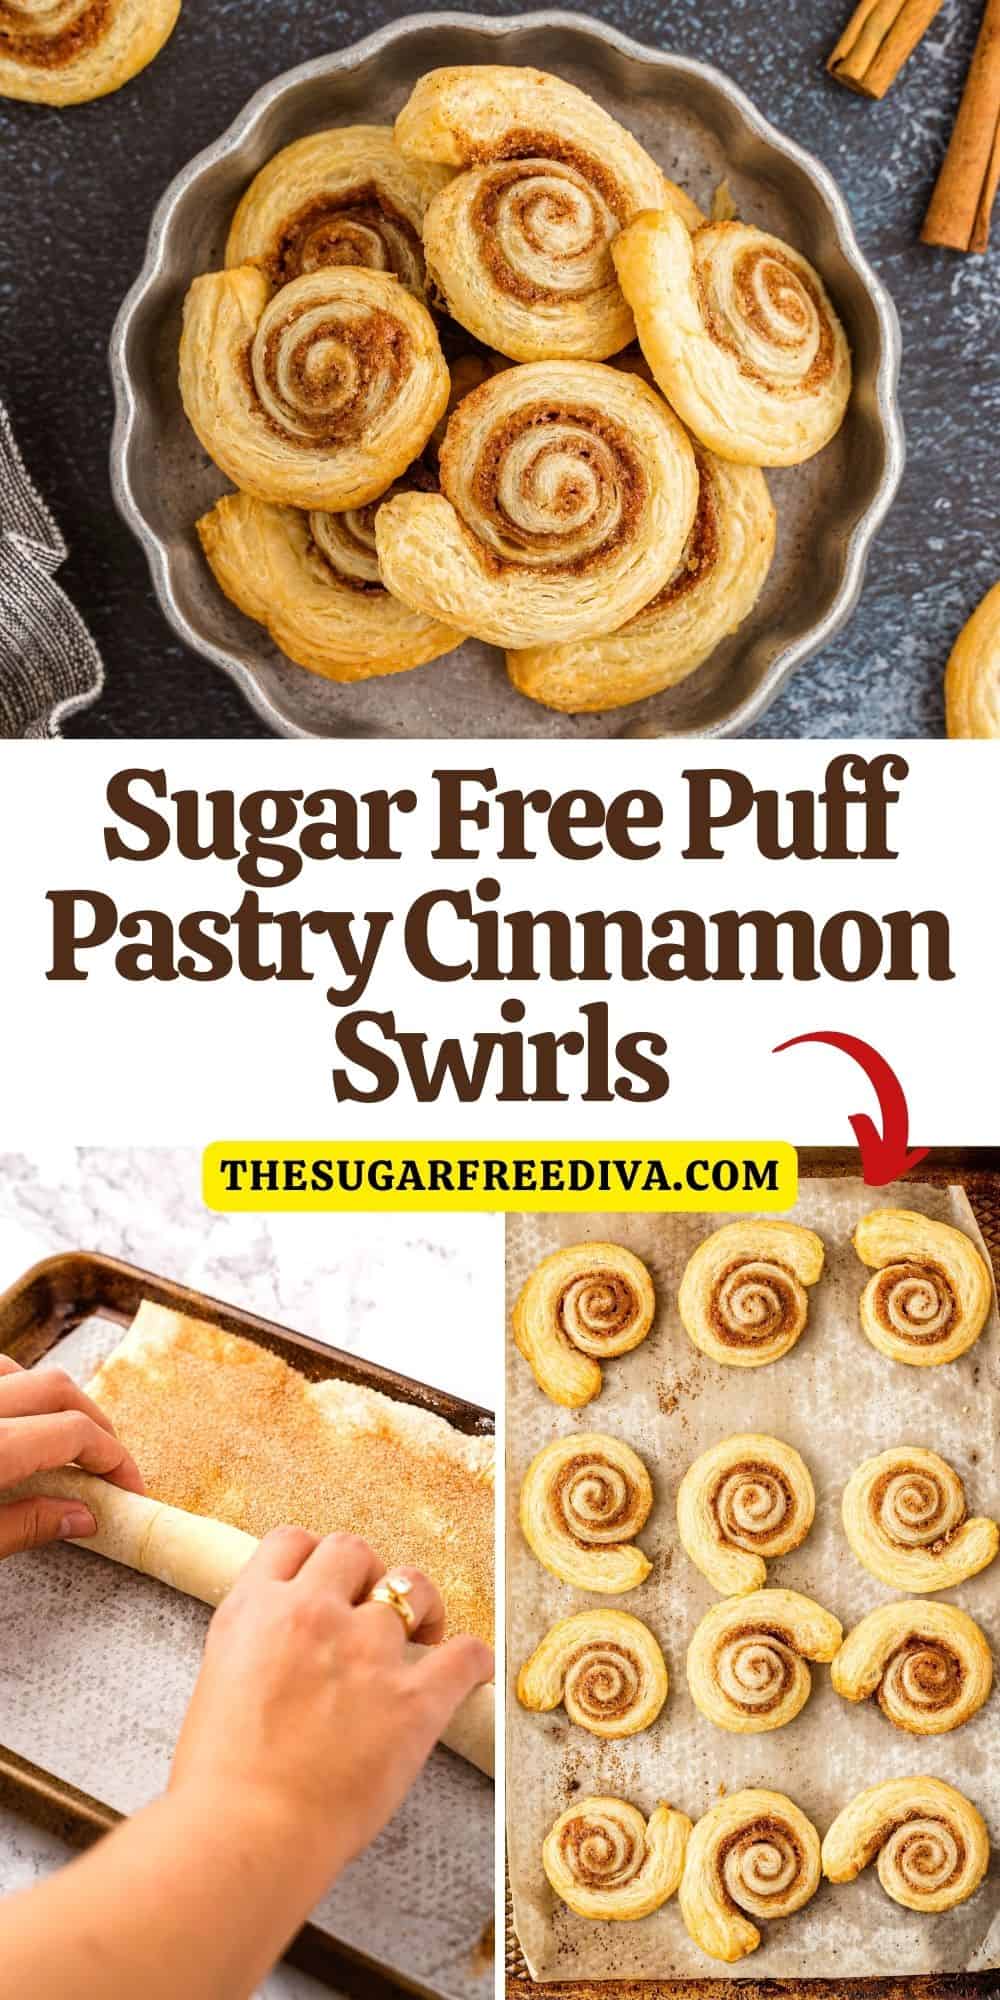 Sugar Free Puff Pastry Cinnamon Swirls, a simple breakfast, brunch, or dessert recipe made with three ingredients and no added sugar.